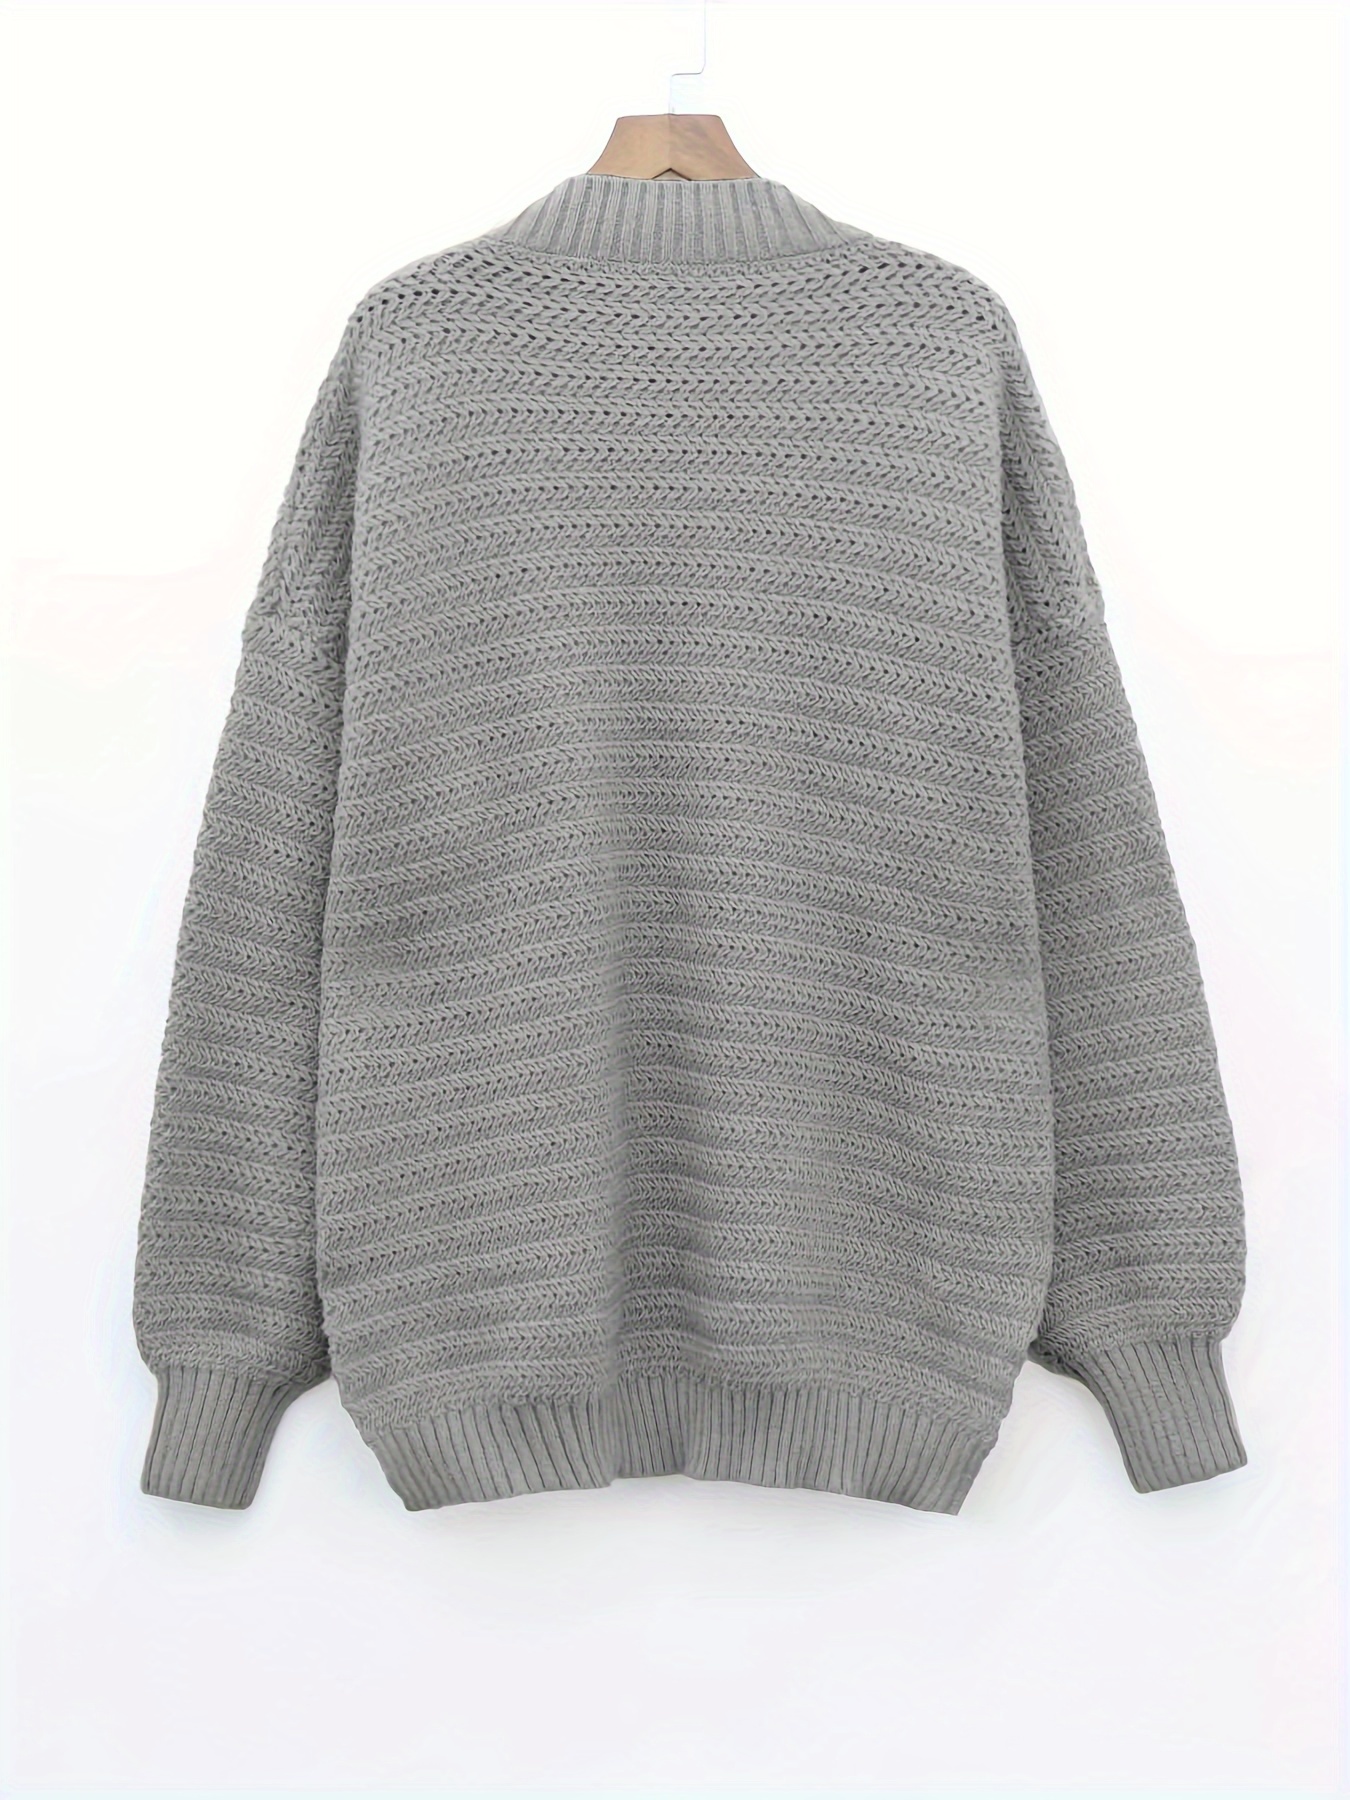 Women's High Neck Long Sleeve Knitted Stretchy Stretchy Knitted